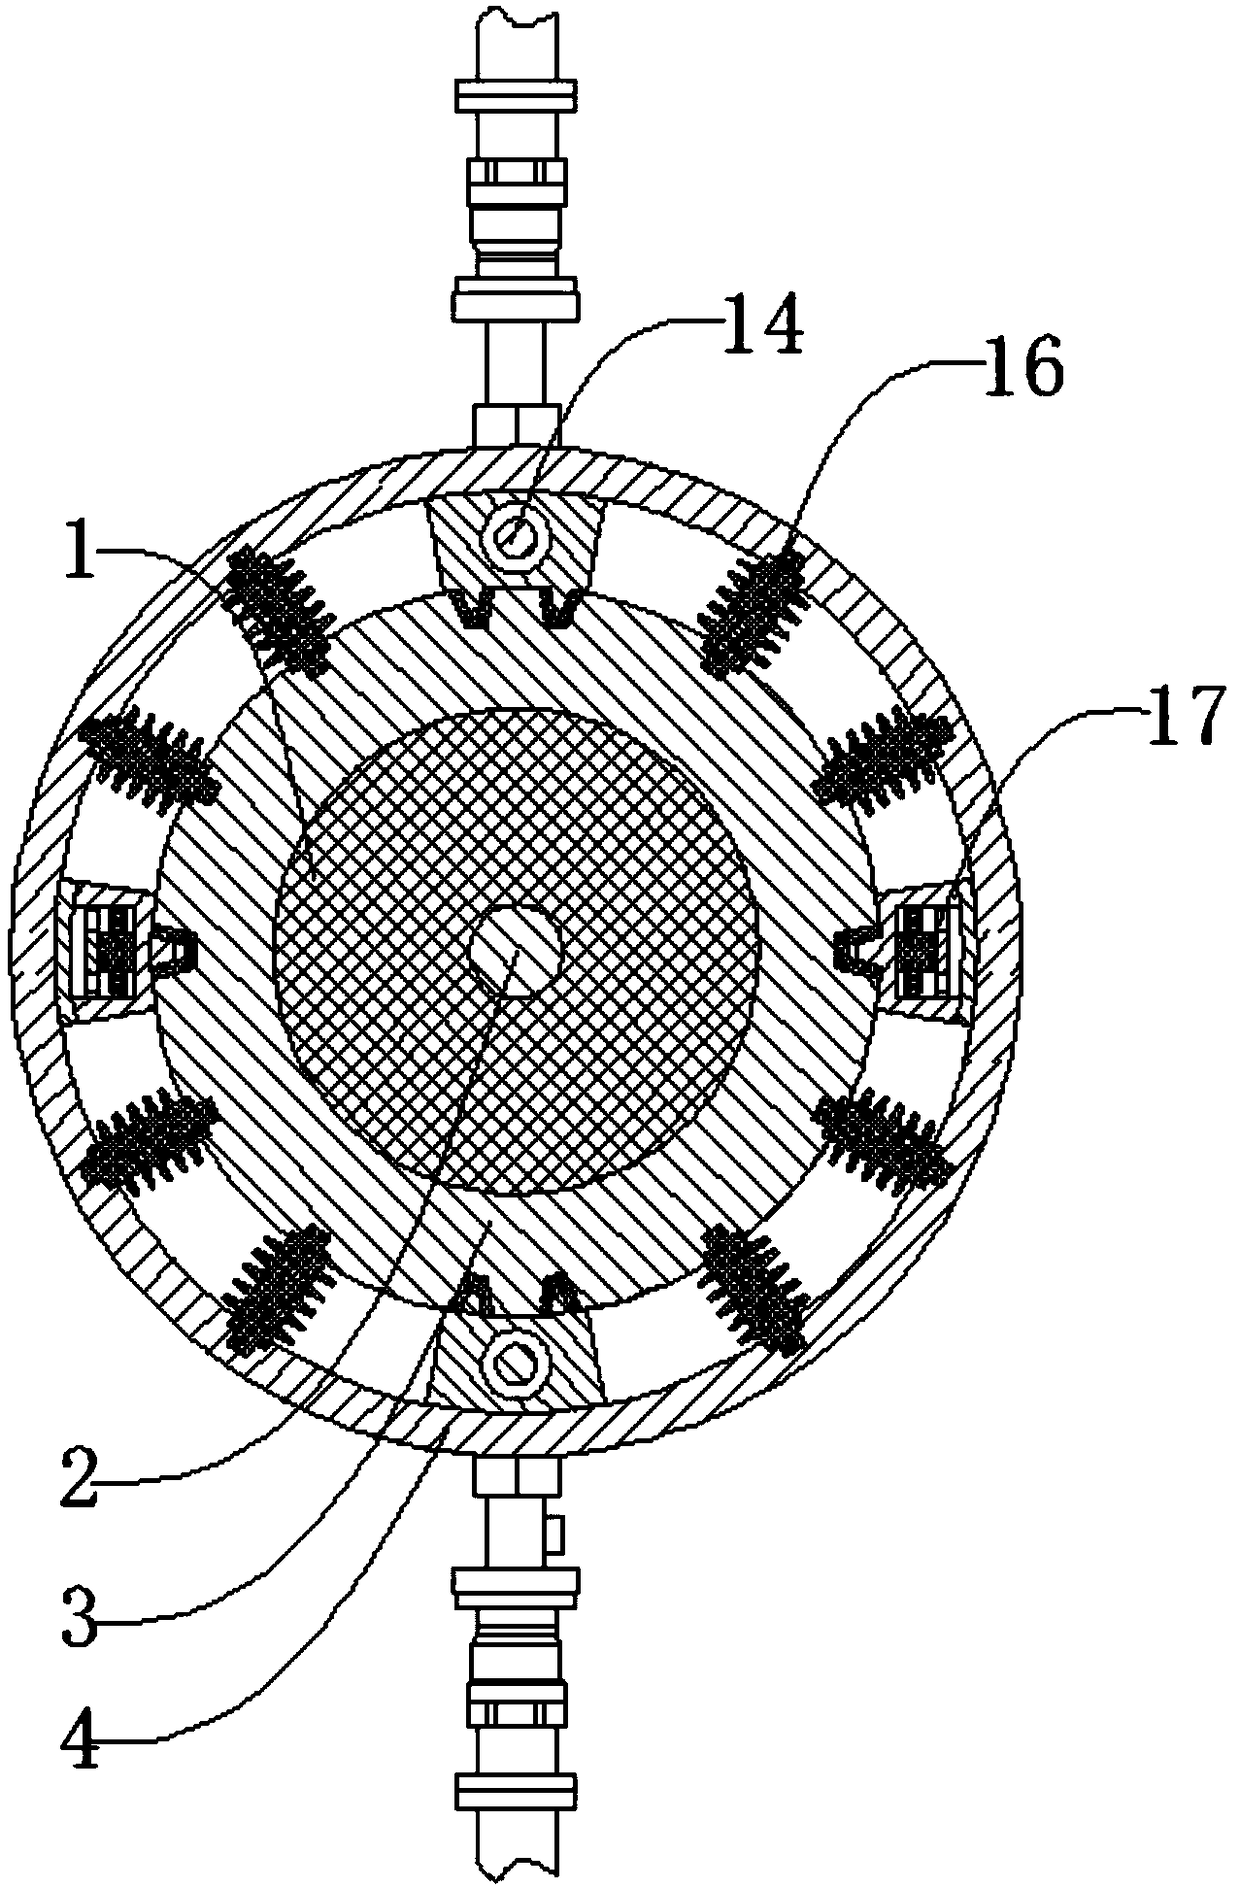 High-efficiency heat-dissipating water-cooled motor